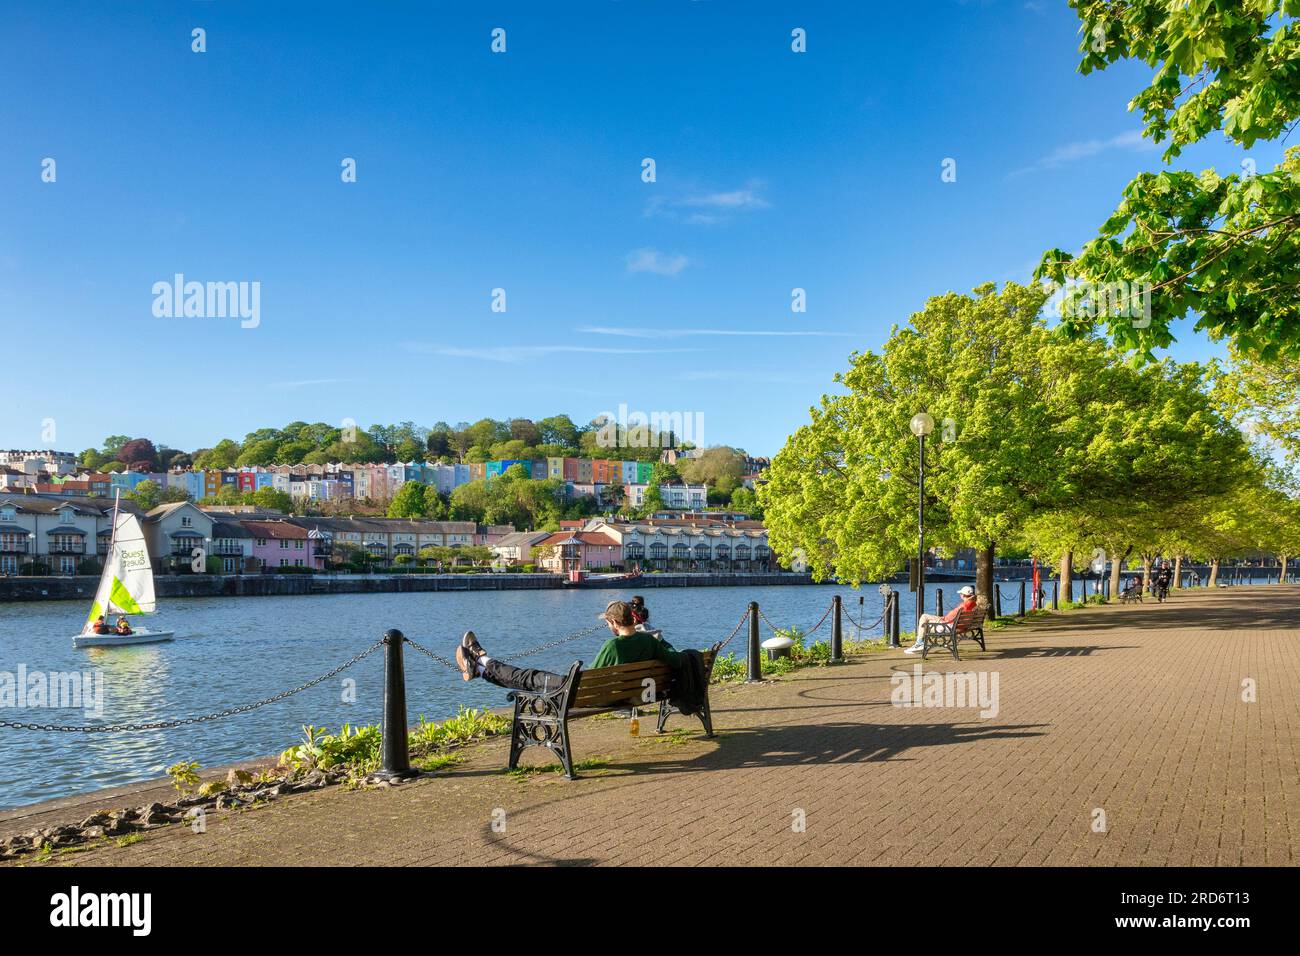 10 May 2023: Bristol, UK - A beautiful evening at Bristol Docks, young couple sitting on a bench, colourful houses,fresh green trees, blue sky, sail b Stock Photo